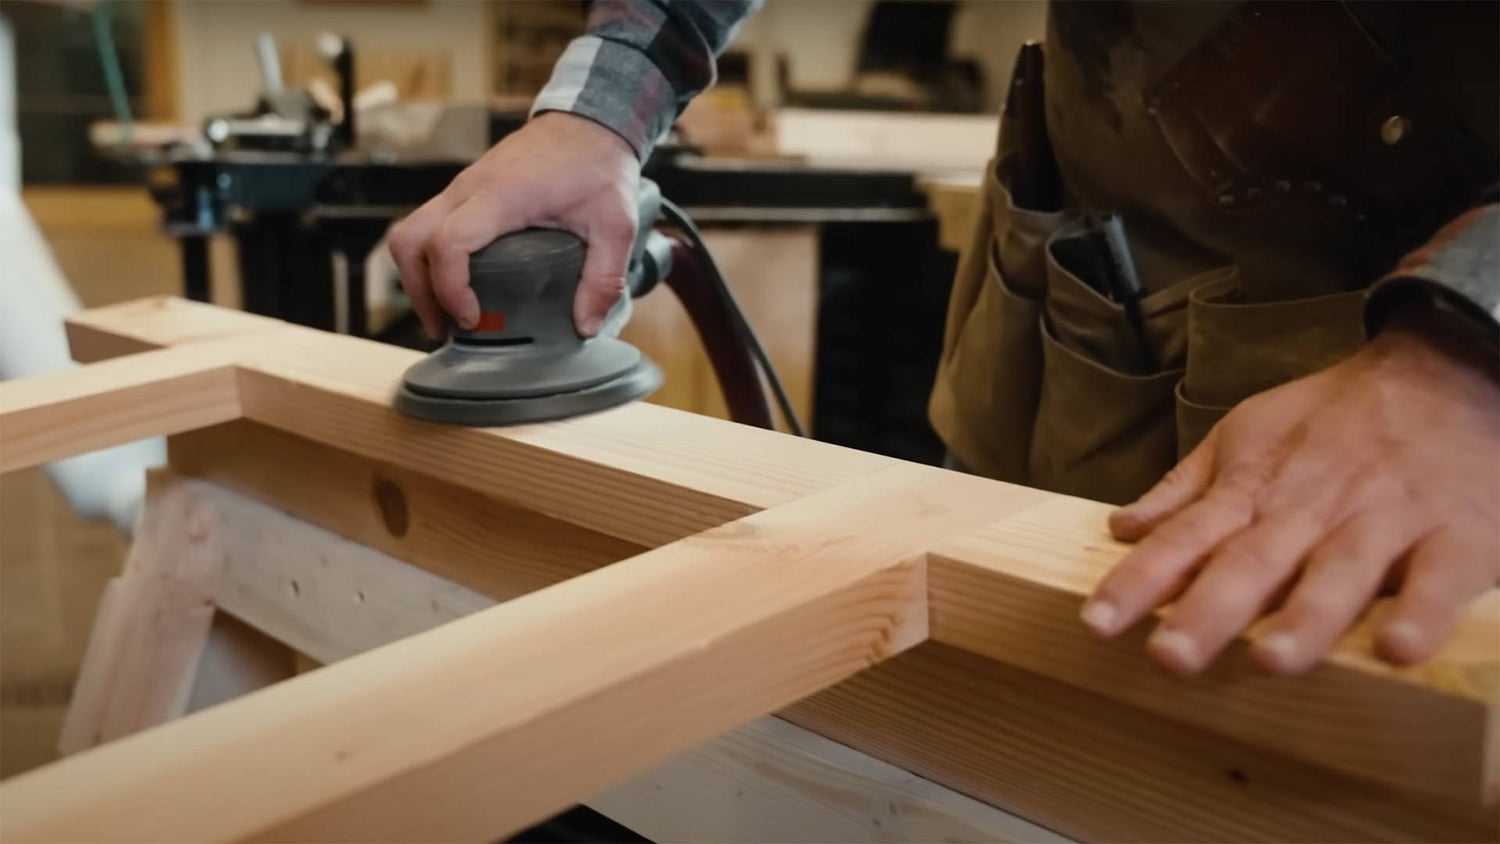 How to Cut a Half Lap Joint: The Best Joinery Style for Beginner Woodworkers